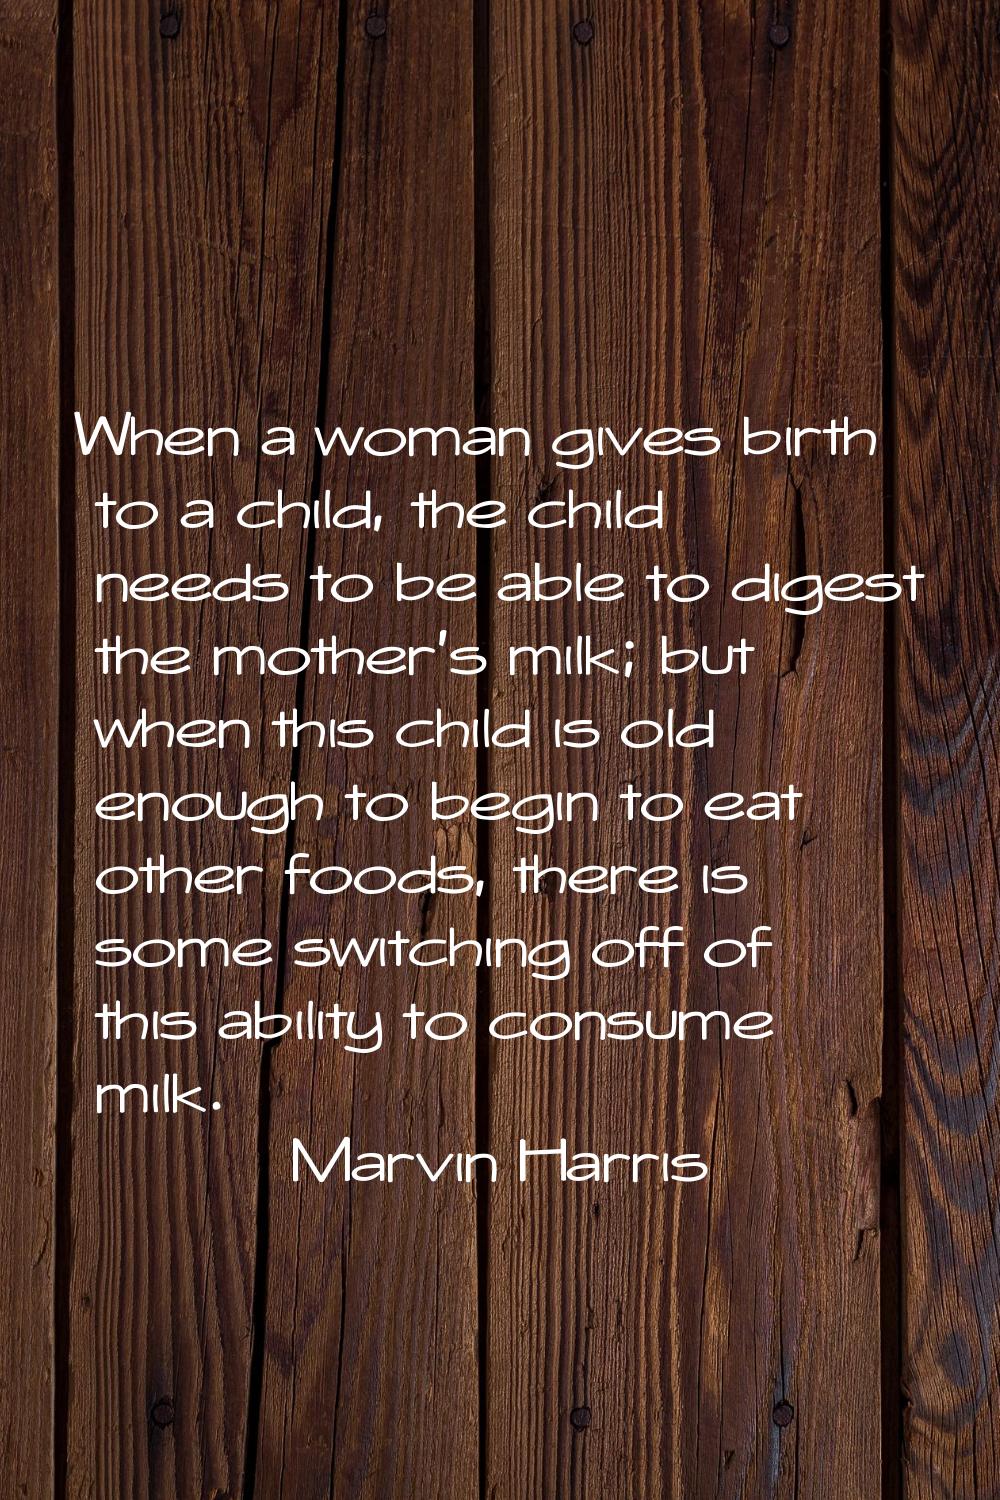 When a woman gives birth to a child, the child needs to be able to digest the mother's milk; but wh